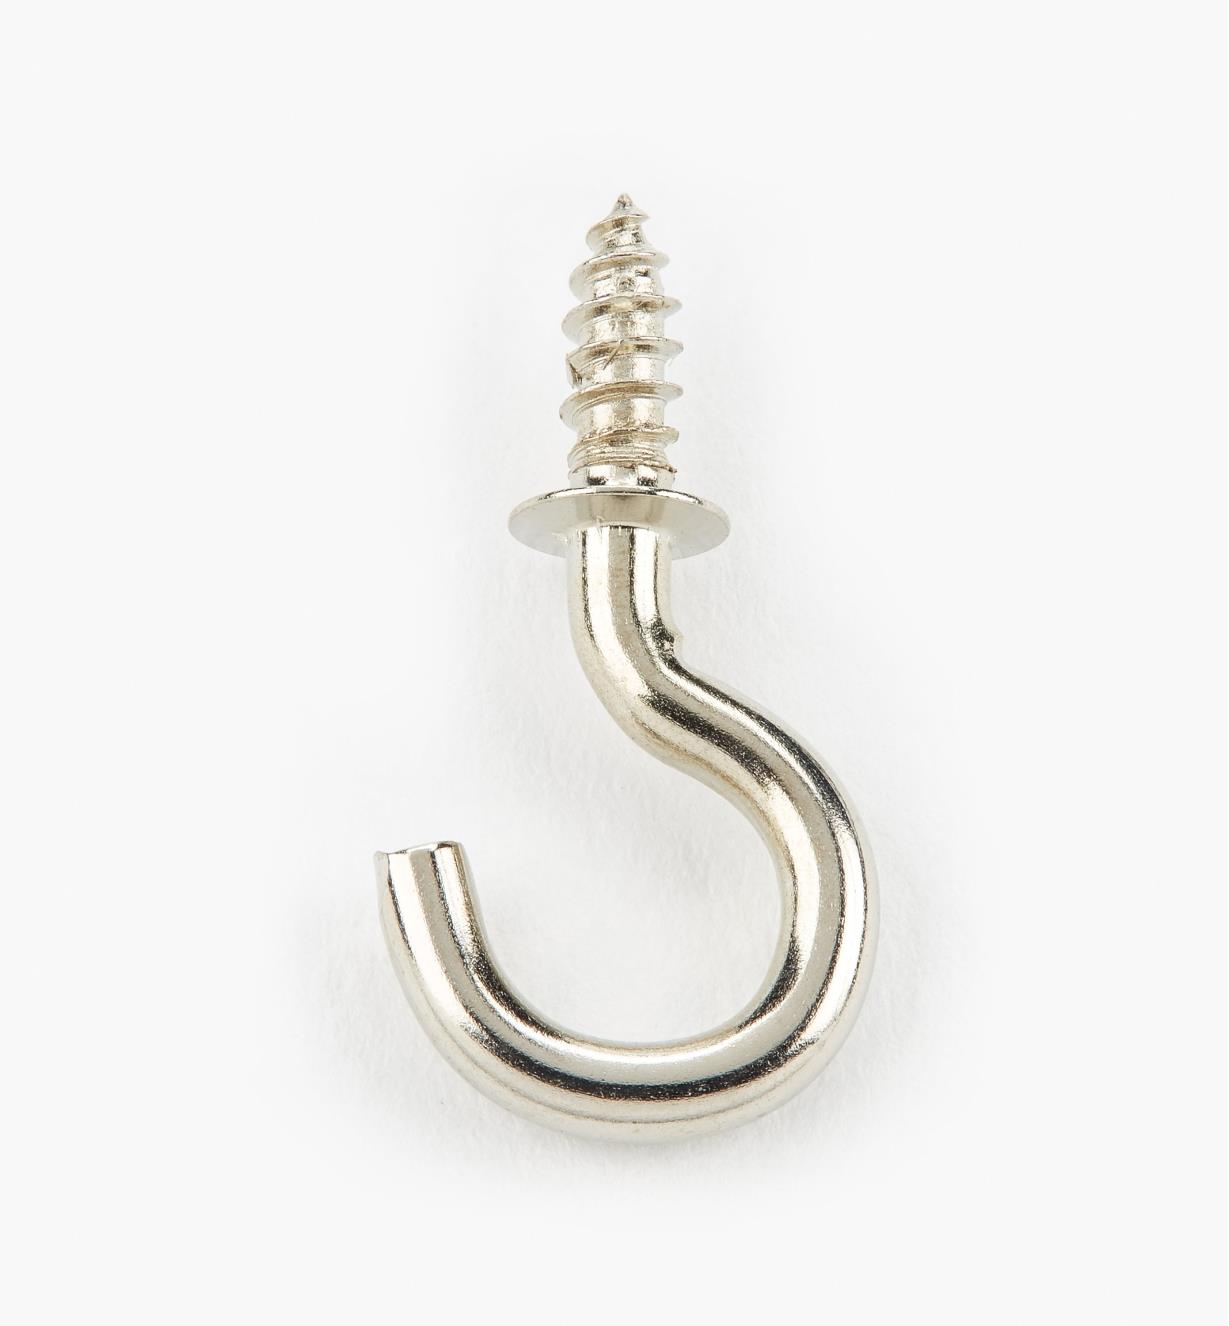 00S5631 - 1/2" Nickel-Plated Cup Hooks (100)